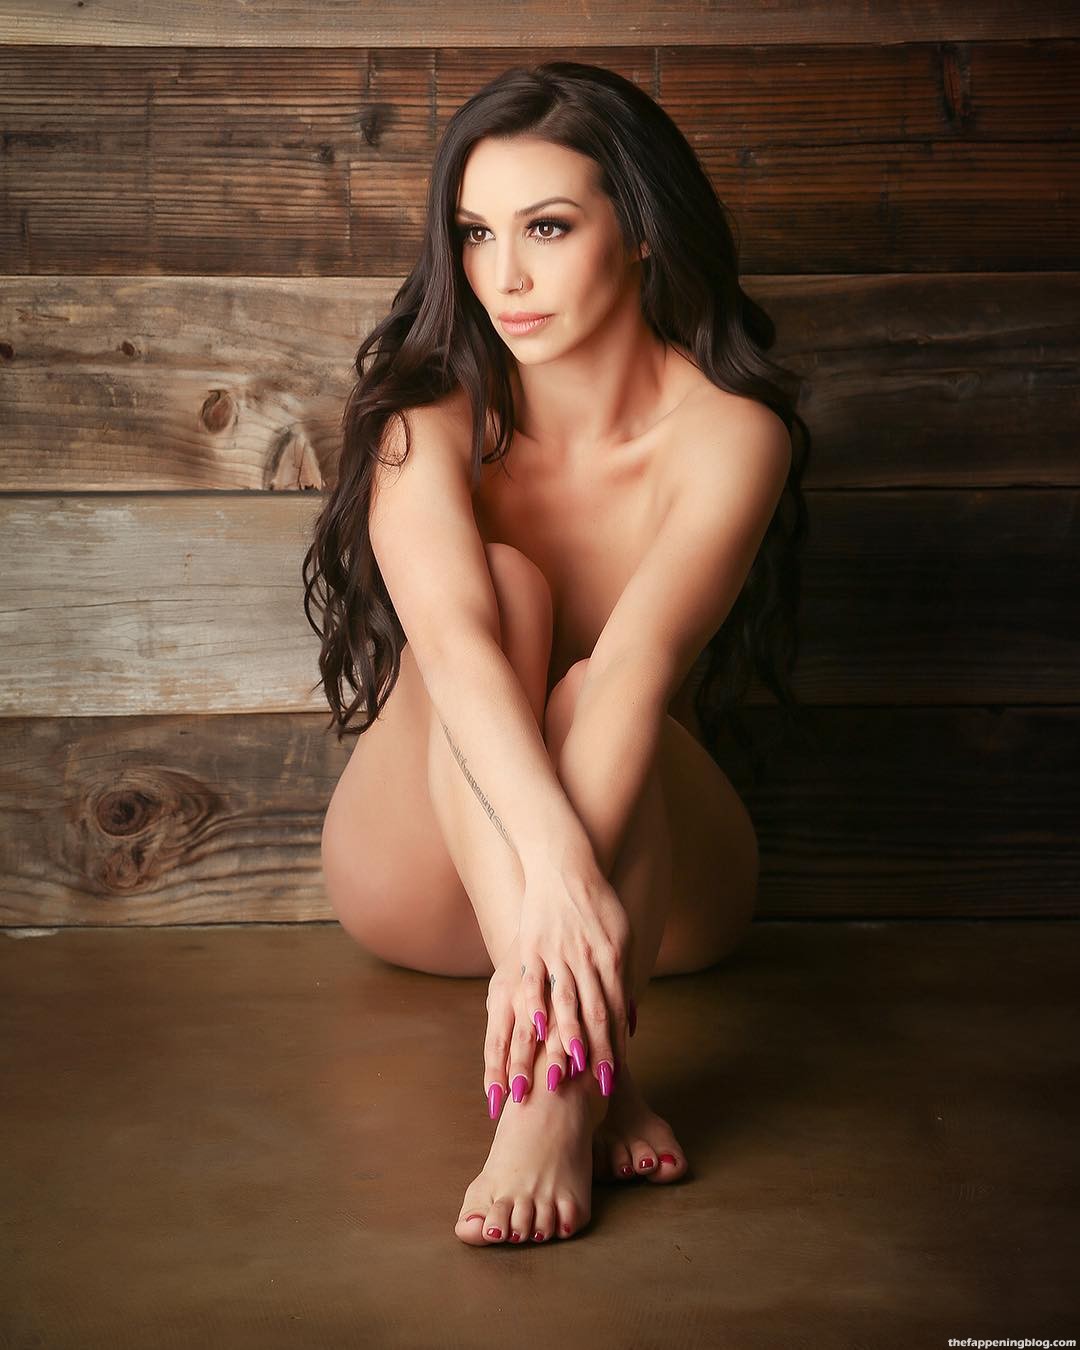 Model, reality TV star, actress and singer Scheana Marie Shay is in a new p...